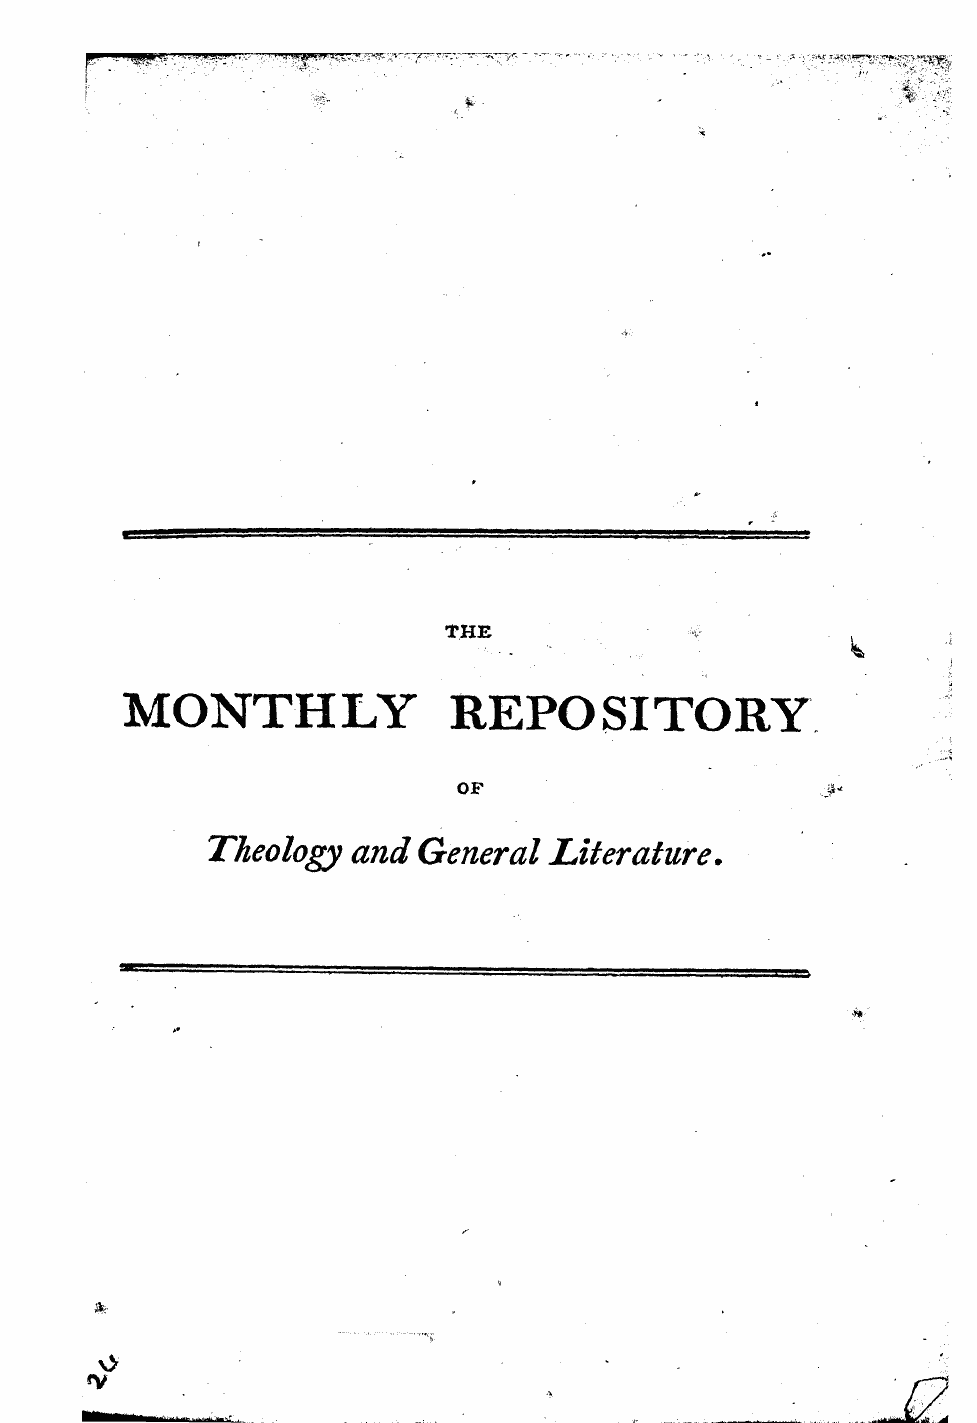 Monthly Repository (1806-1838) and Unitarian Chronicle (1832-1833): F Y, 1st edition, Front matter - The C Monthly Repository Of Theology And...